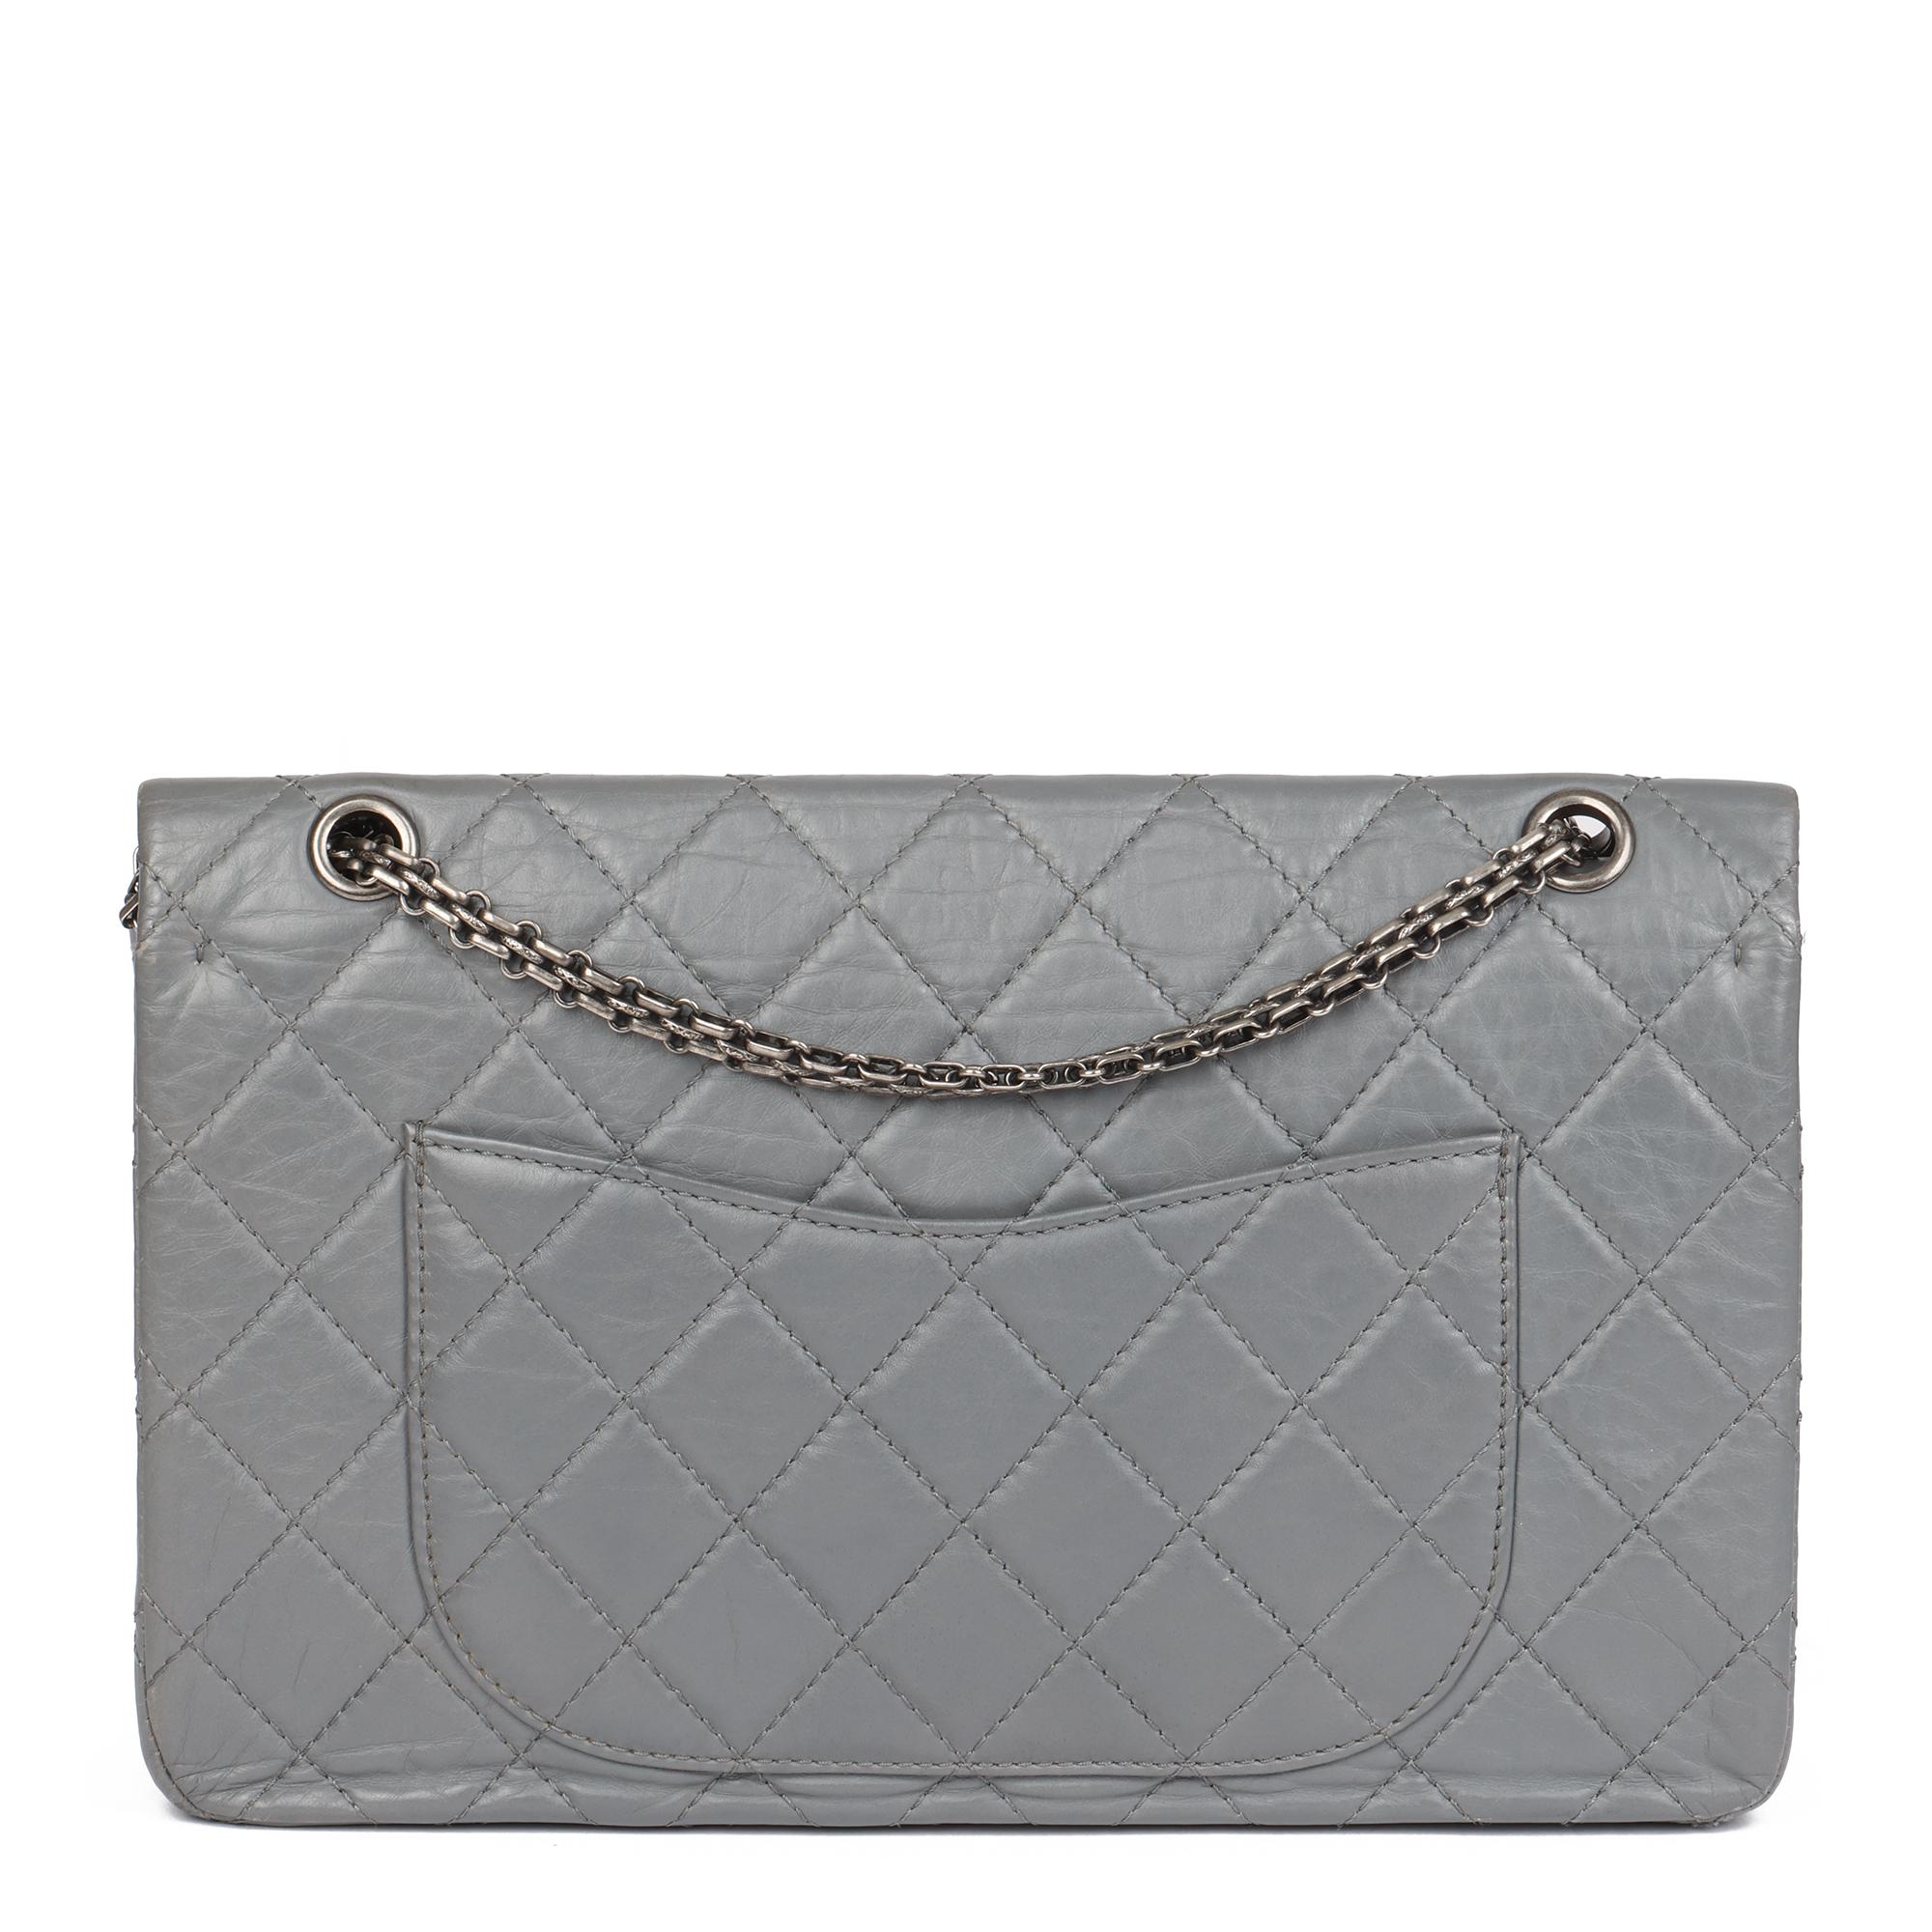 Chanel Grey Aged Quilted Calfskin Leather 227 2.55 Reissue Flap Bag 5